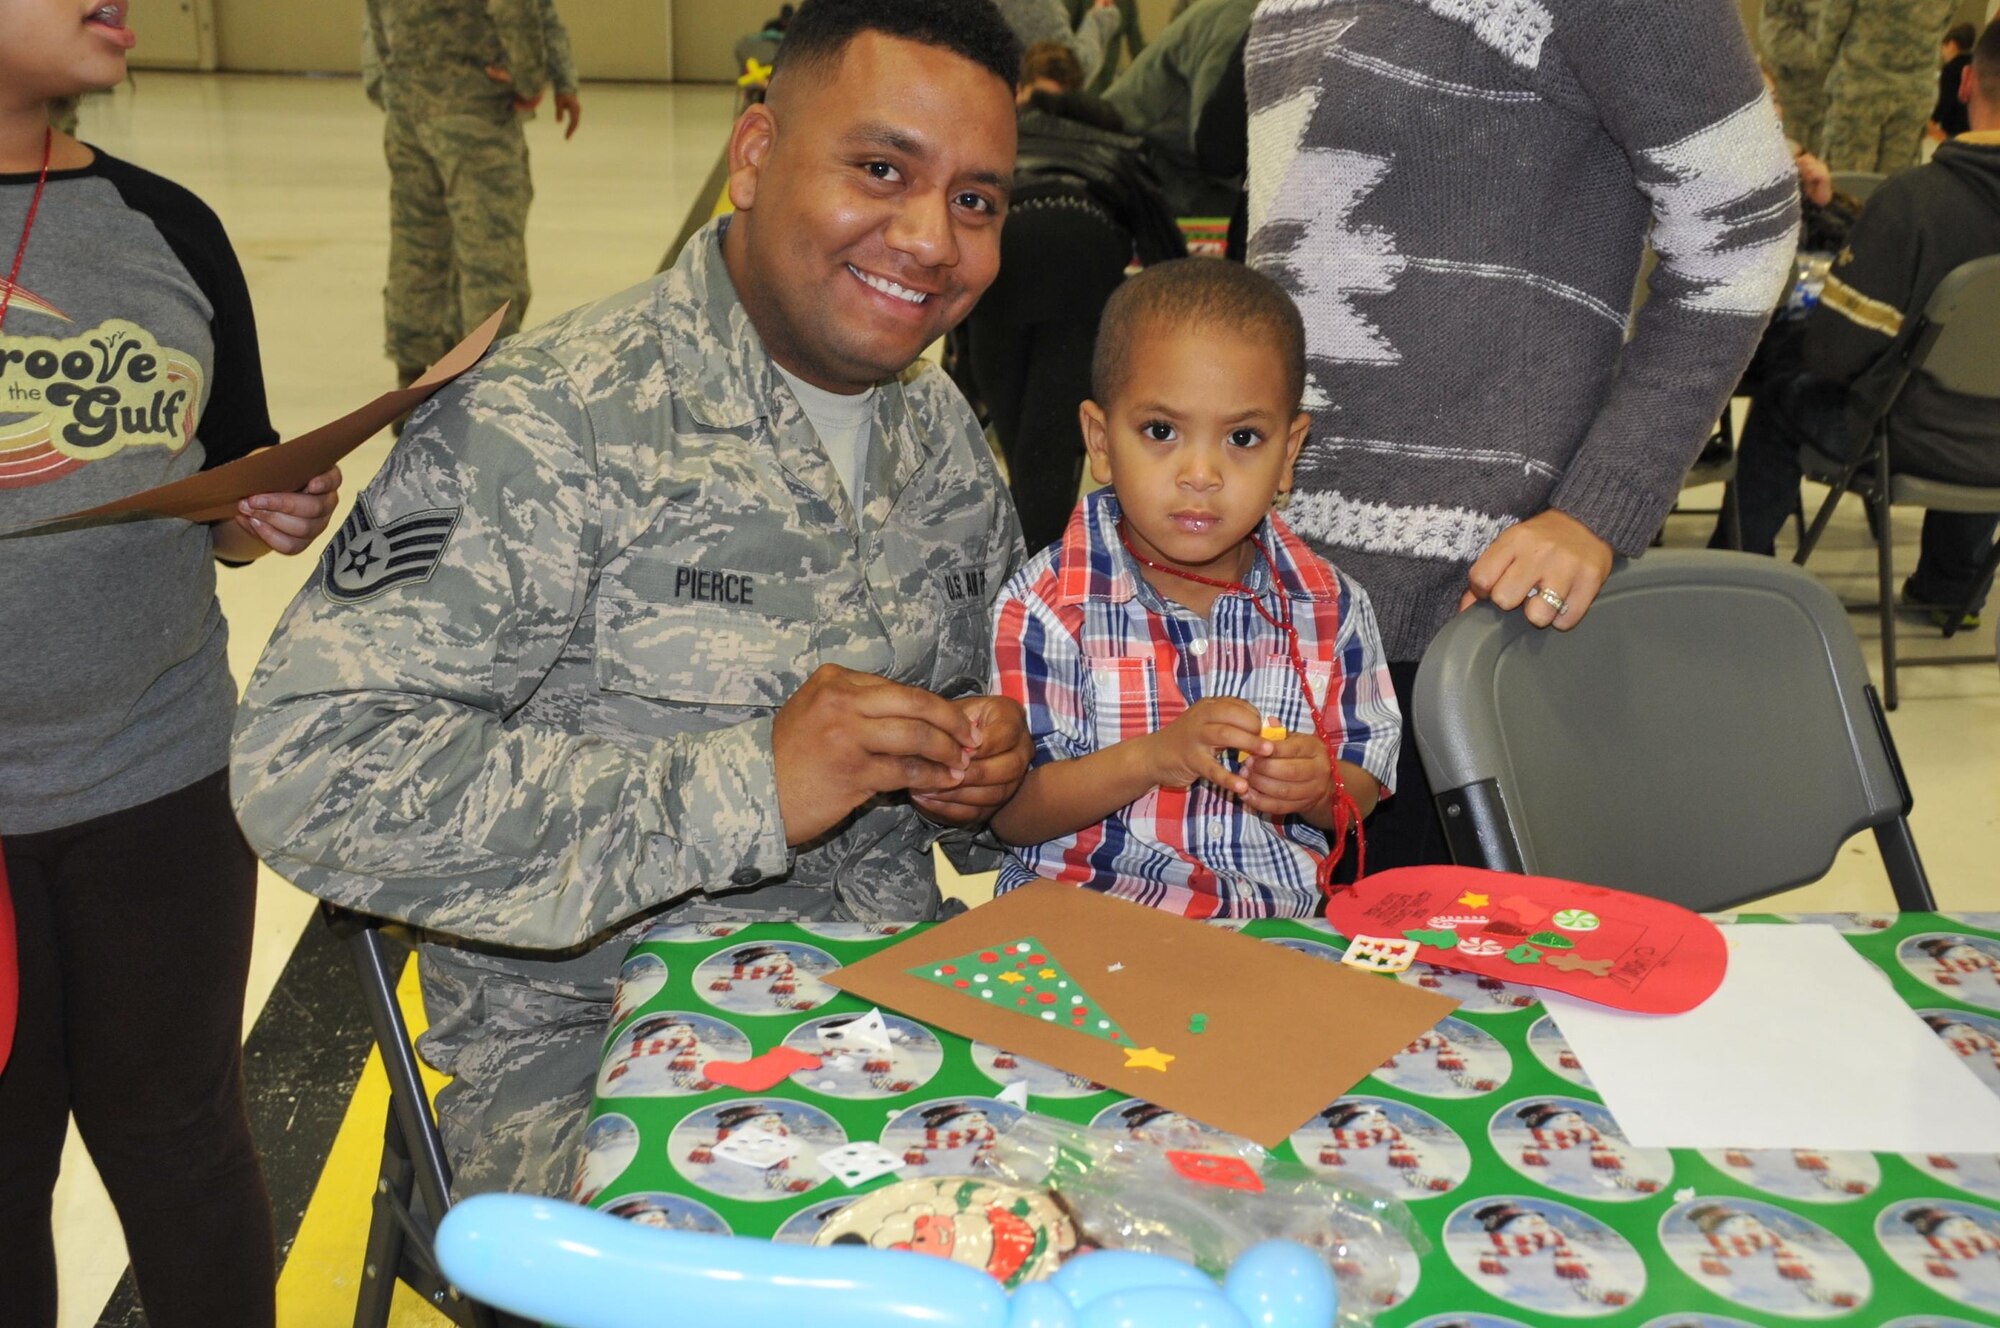 Staff Sgt. William Pierce, 403rd Maintenace Squadron fuel cell specialist, and his son Mason work together to create a Christmas card.  Members of the 403rd Wing and their families visit with Santa during the 403rd Wing children's holiday party Dec. 3, 2016.  (U.S. Air Force photo/Master Sgt. Jessica Kendziorek)